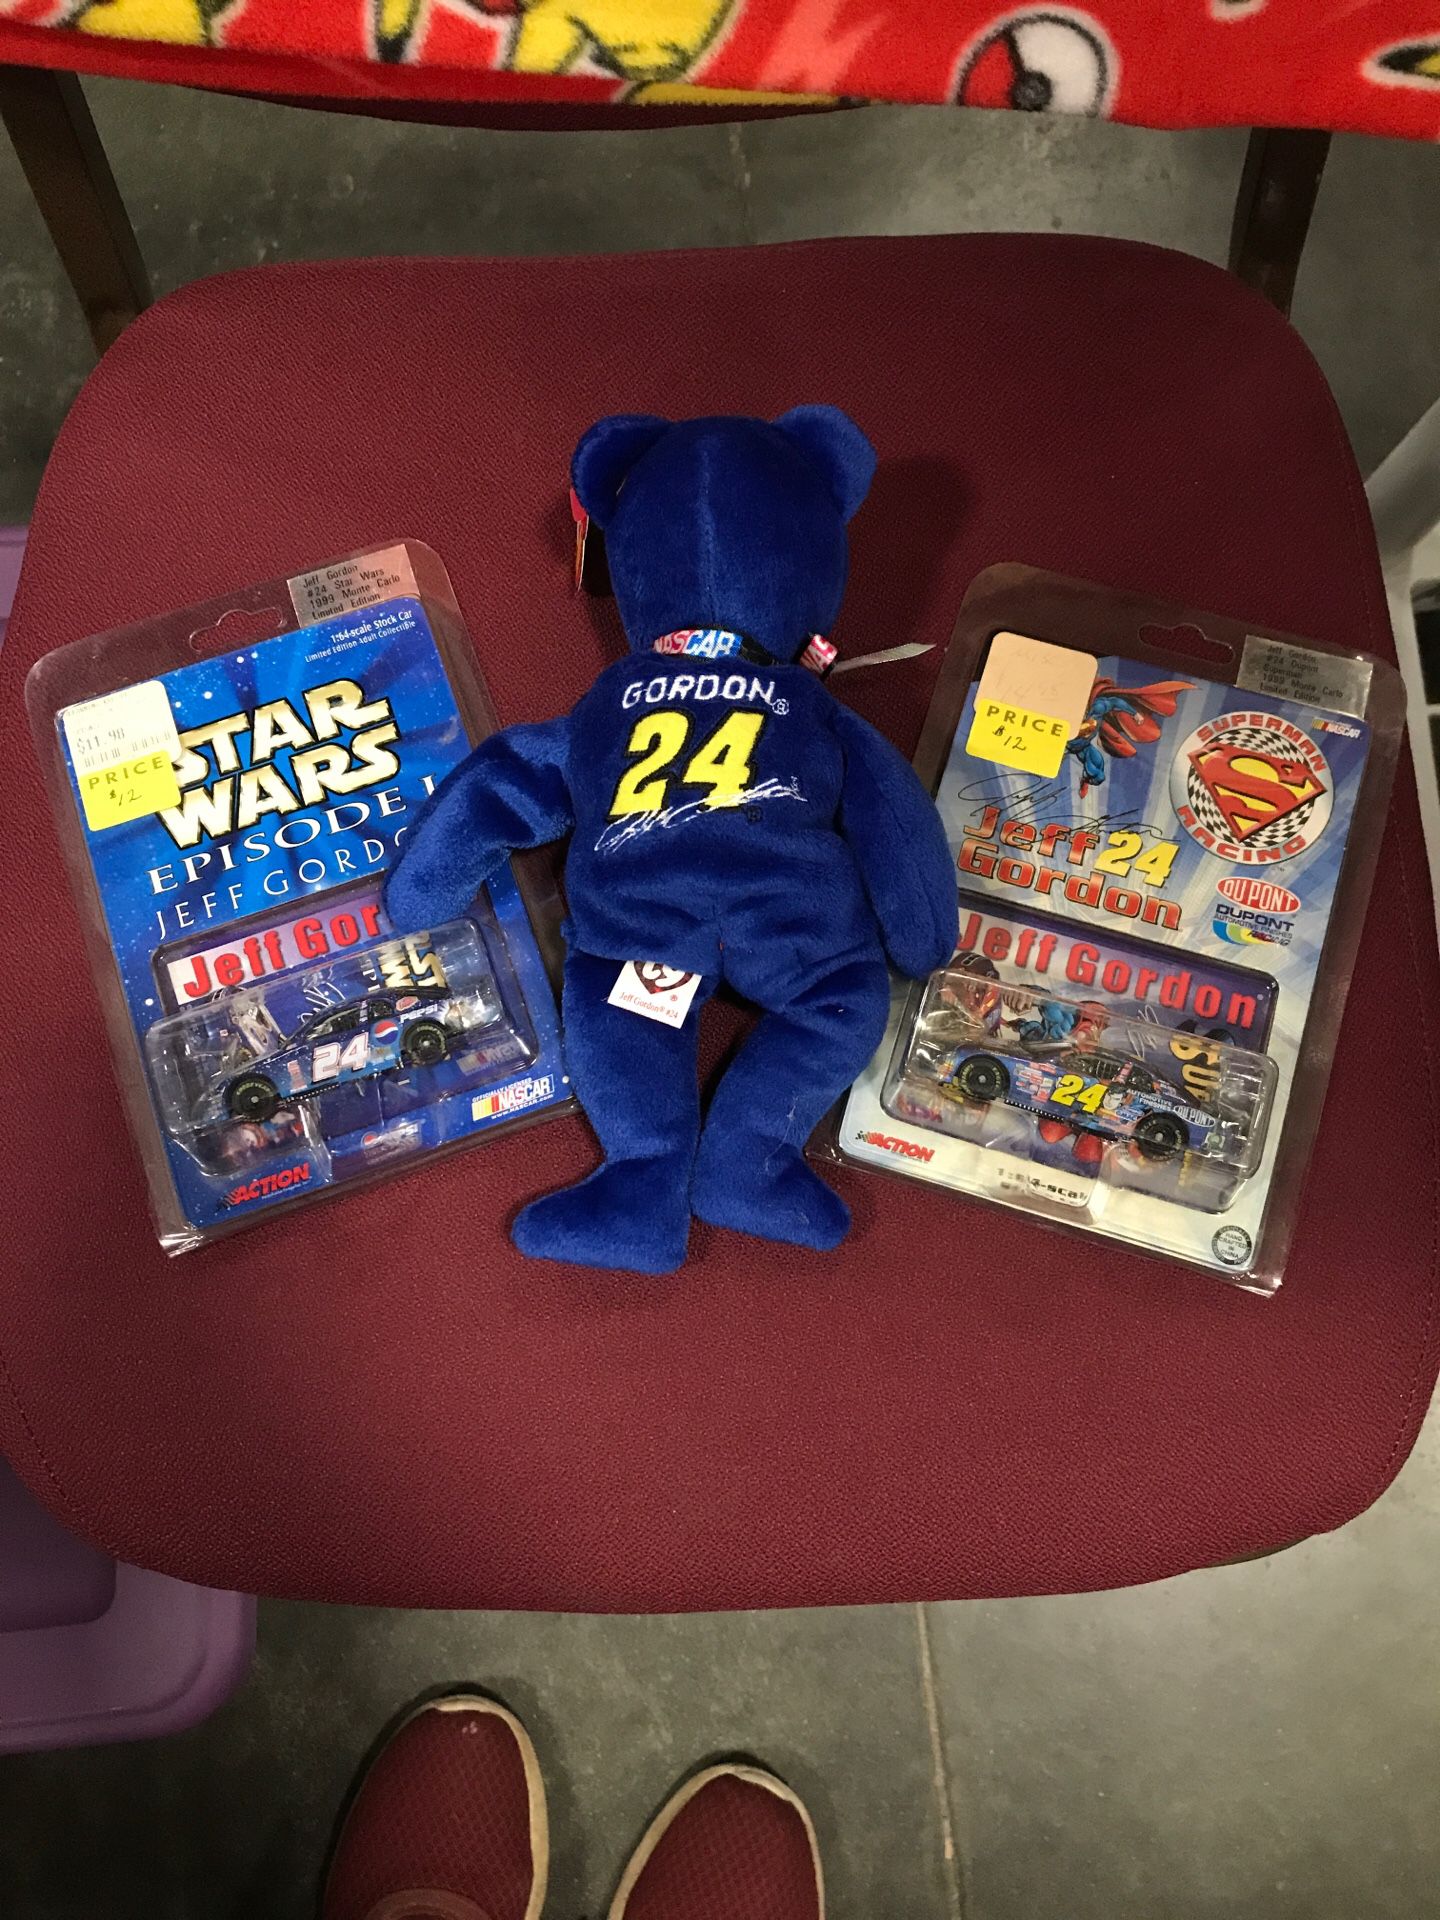 Jeff Gordon Ty beanie baby plus two Action collector cars Star Wars and Superman